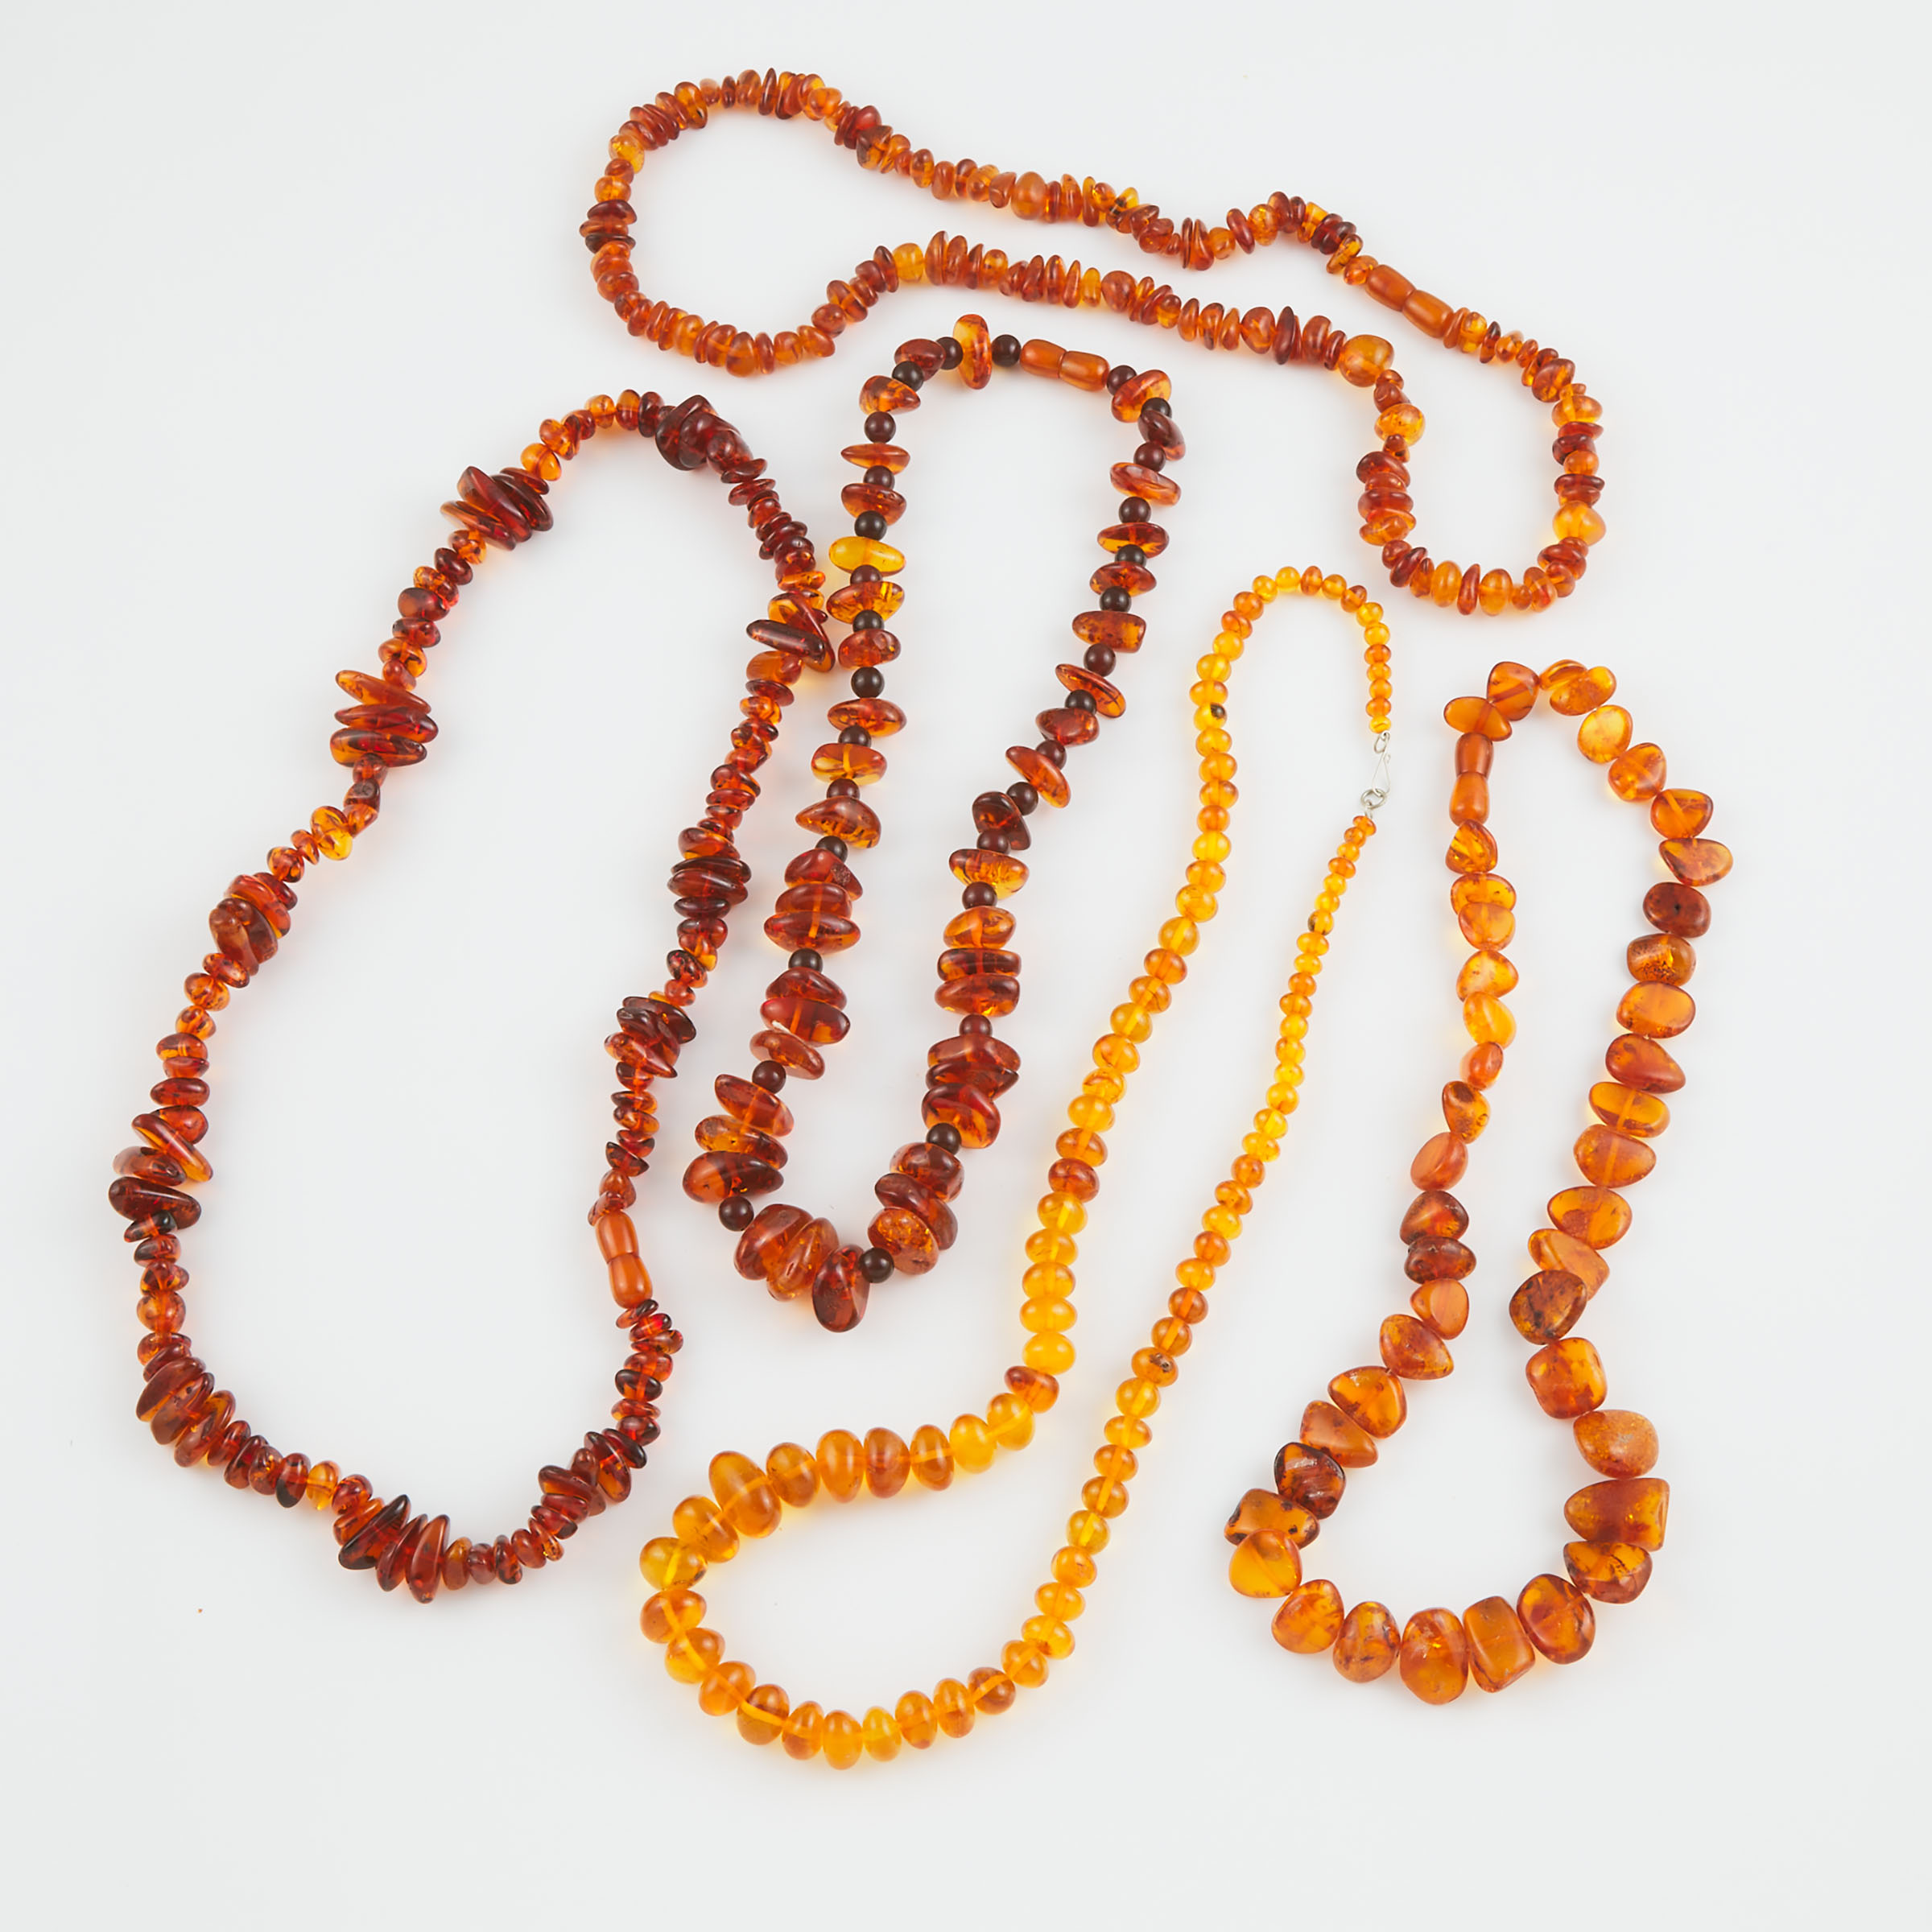 5 Amber Bead Necklaces